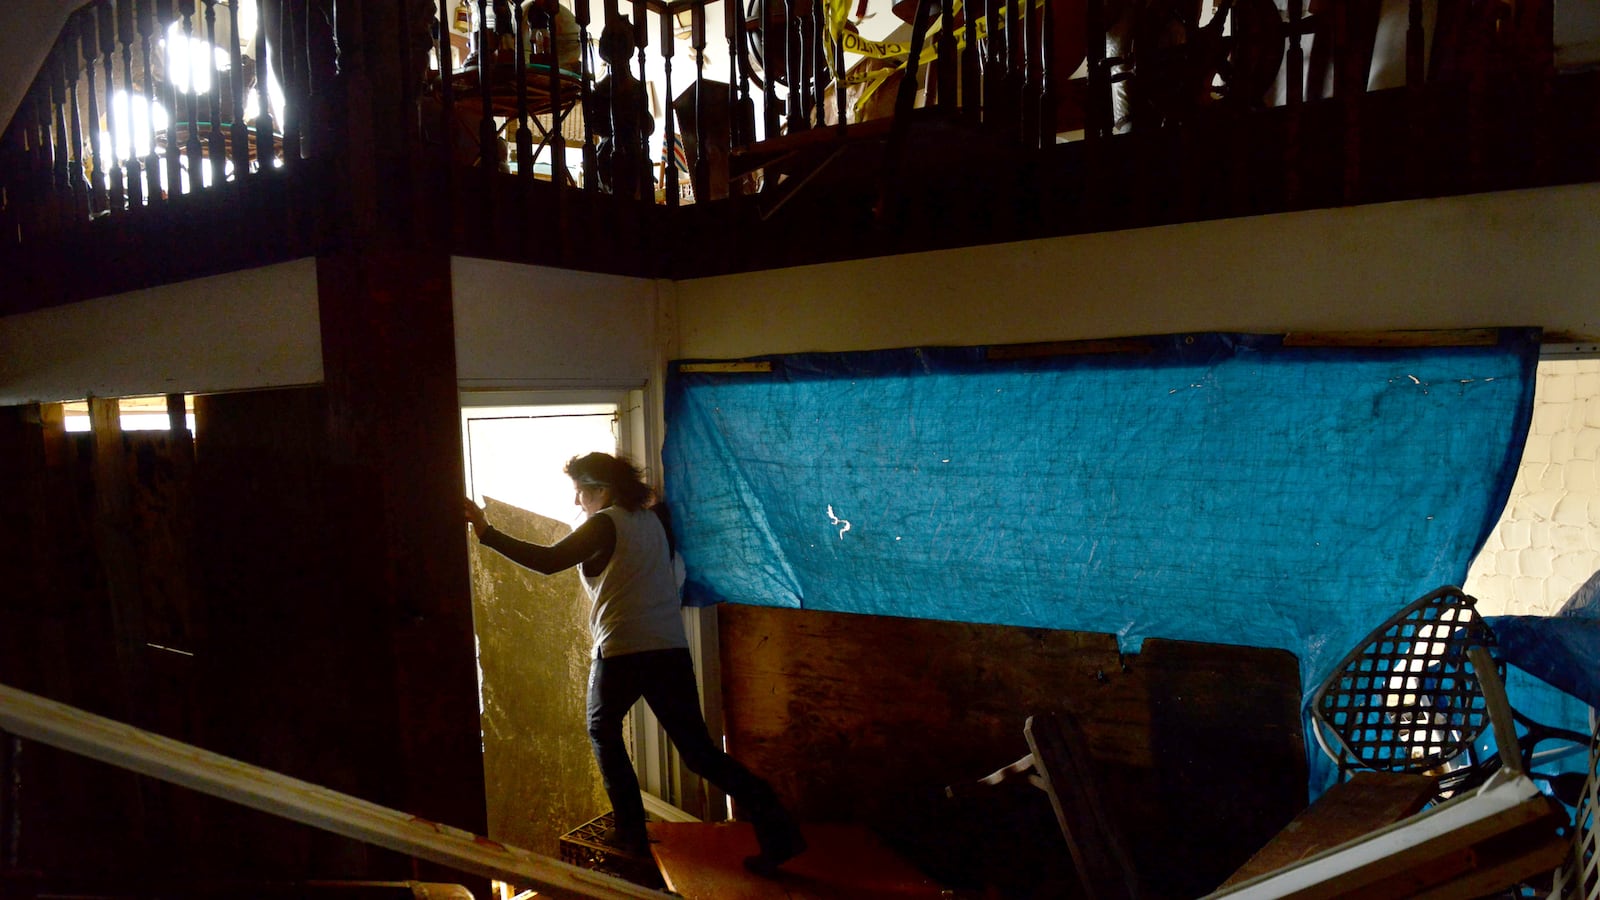 A woman stands in the doorway of a home with blue tarp hung on the wall next to her and fallen wooden beams in the foreground.